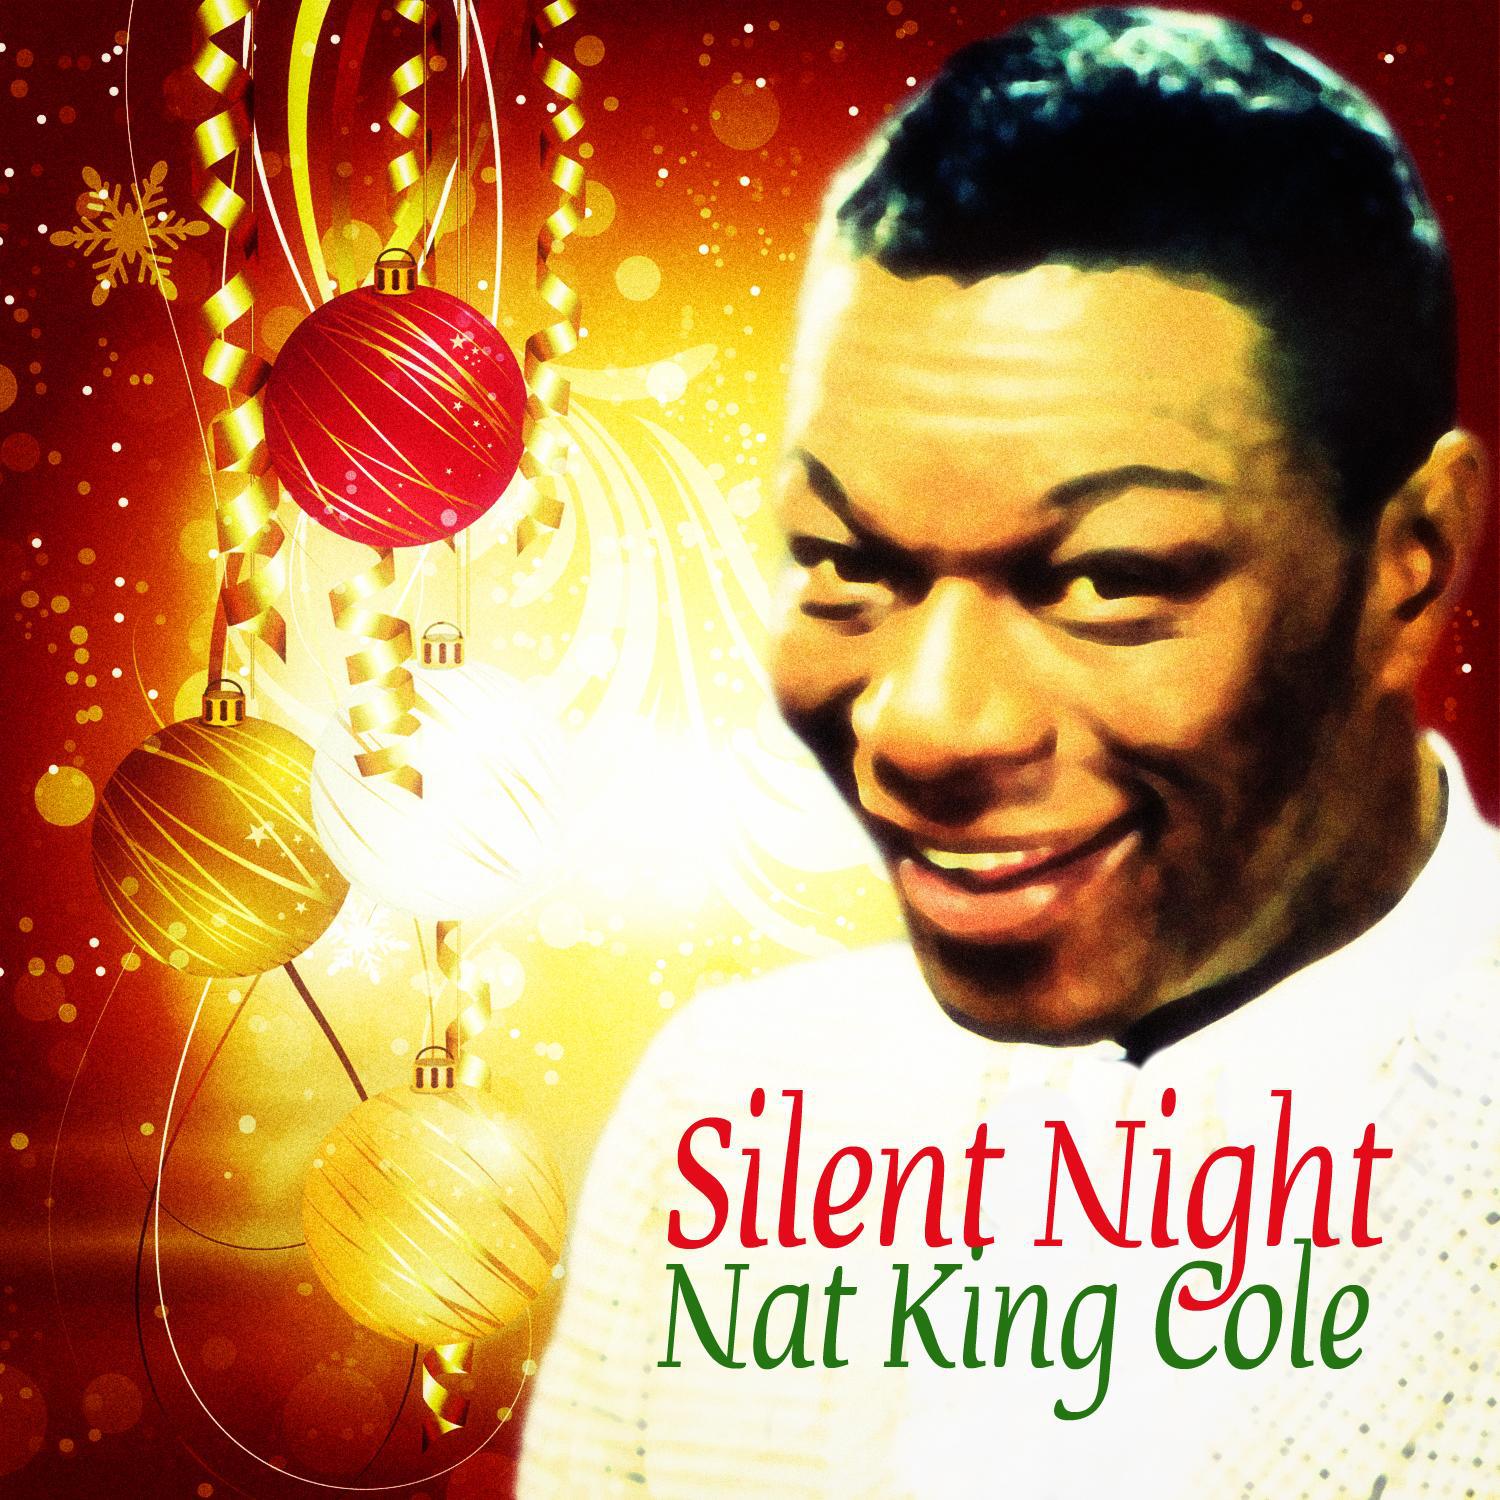 Merry Christmas With Nat King Cole专辑